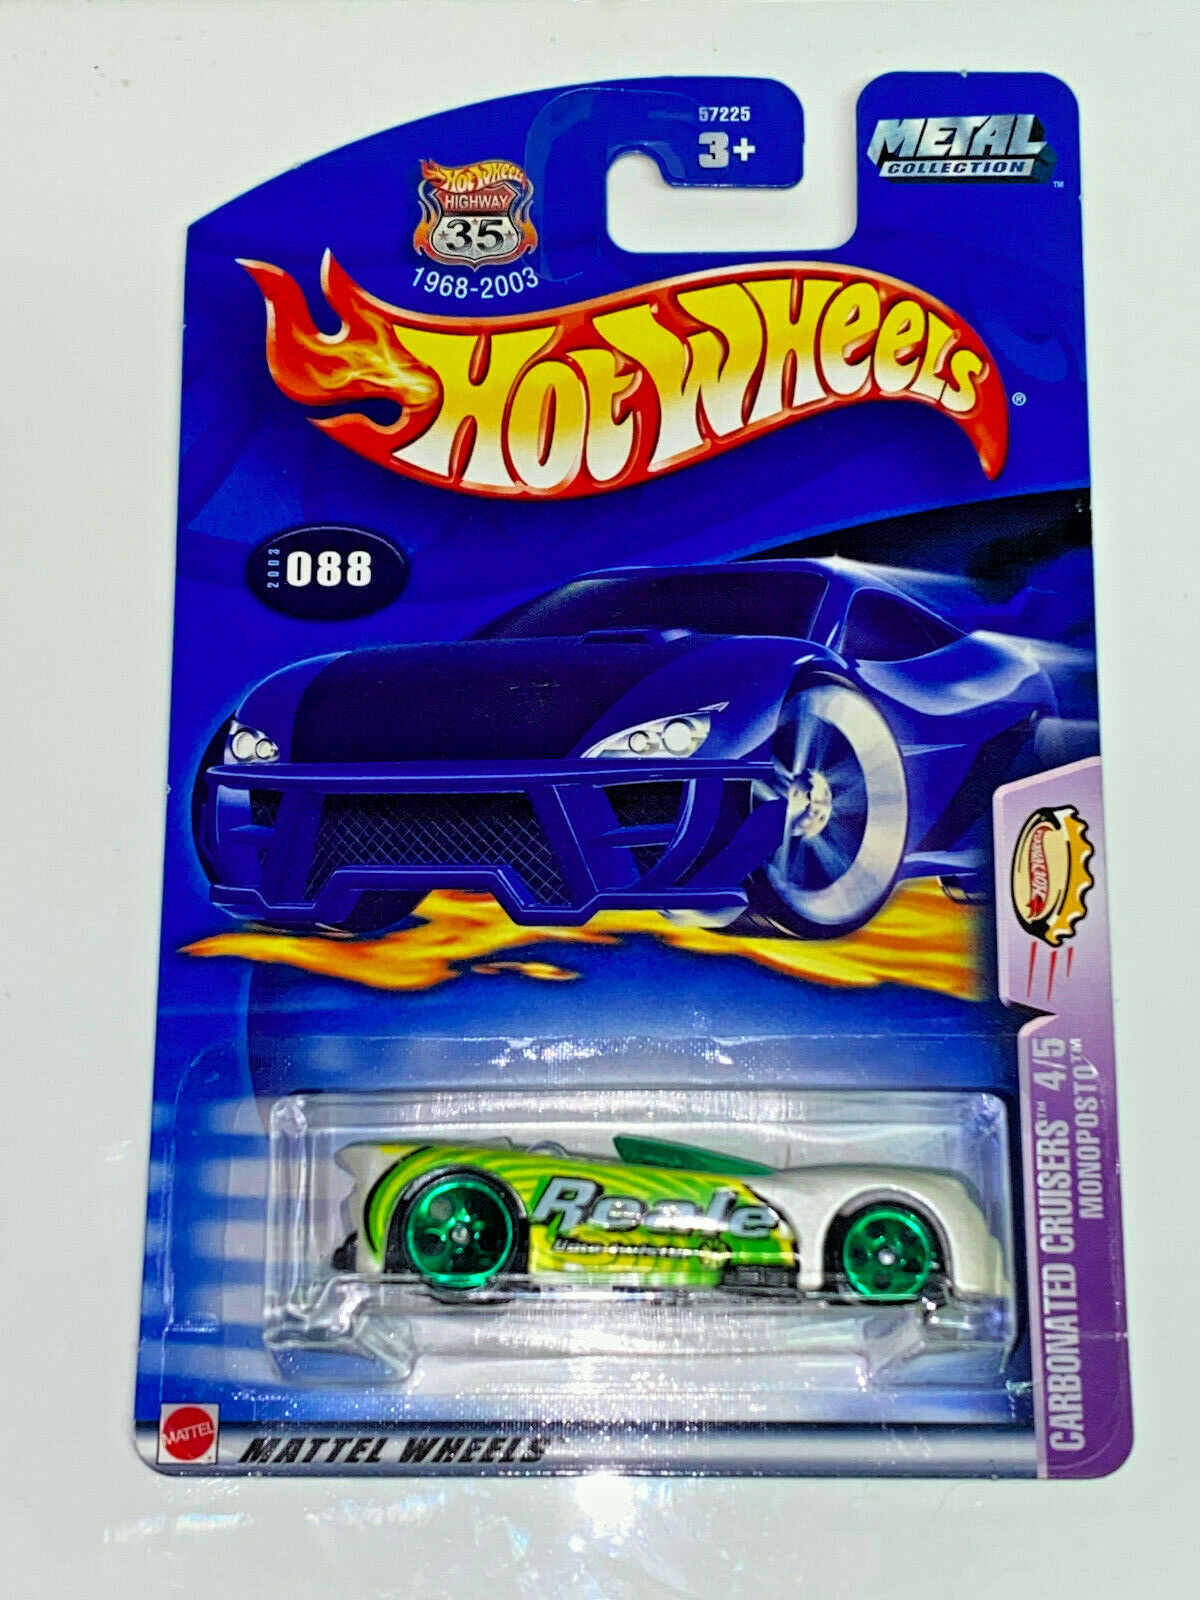 2003 Hot Wheels Carbonated Cruisers FULL SET Lot of 5 #85, #86, #87, #88, #89